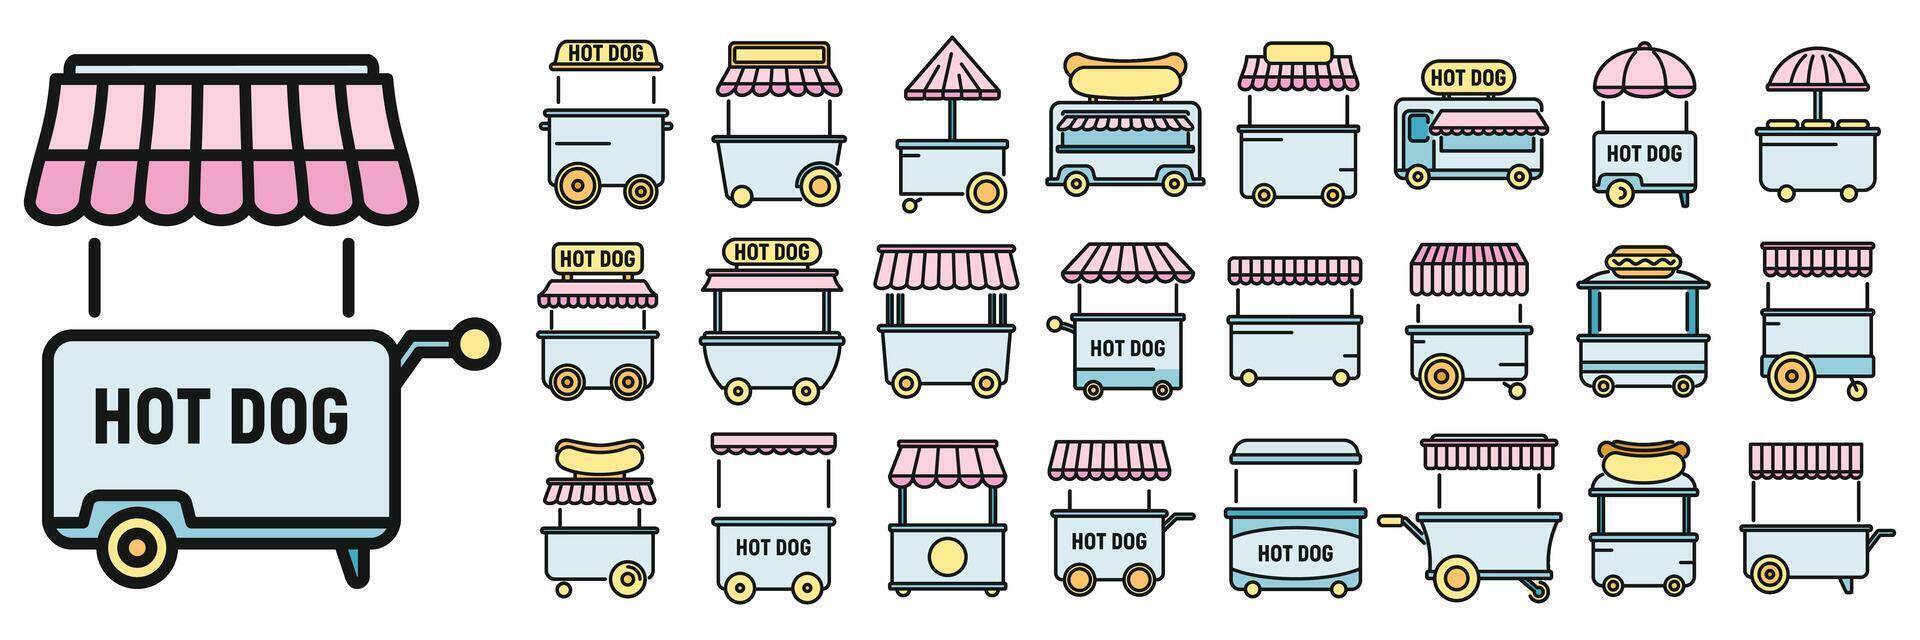 Hot dog cart icons set vector color line